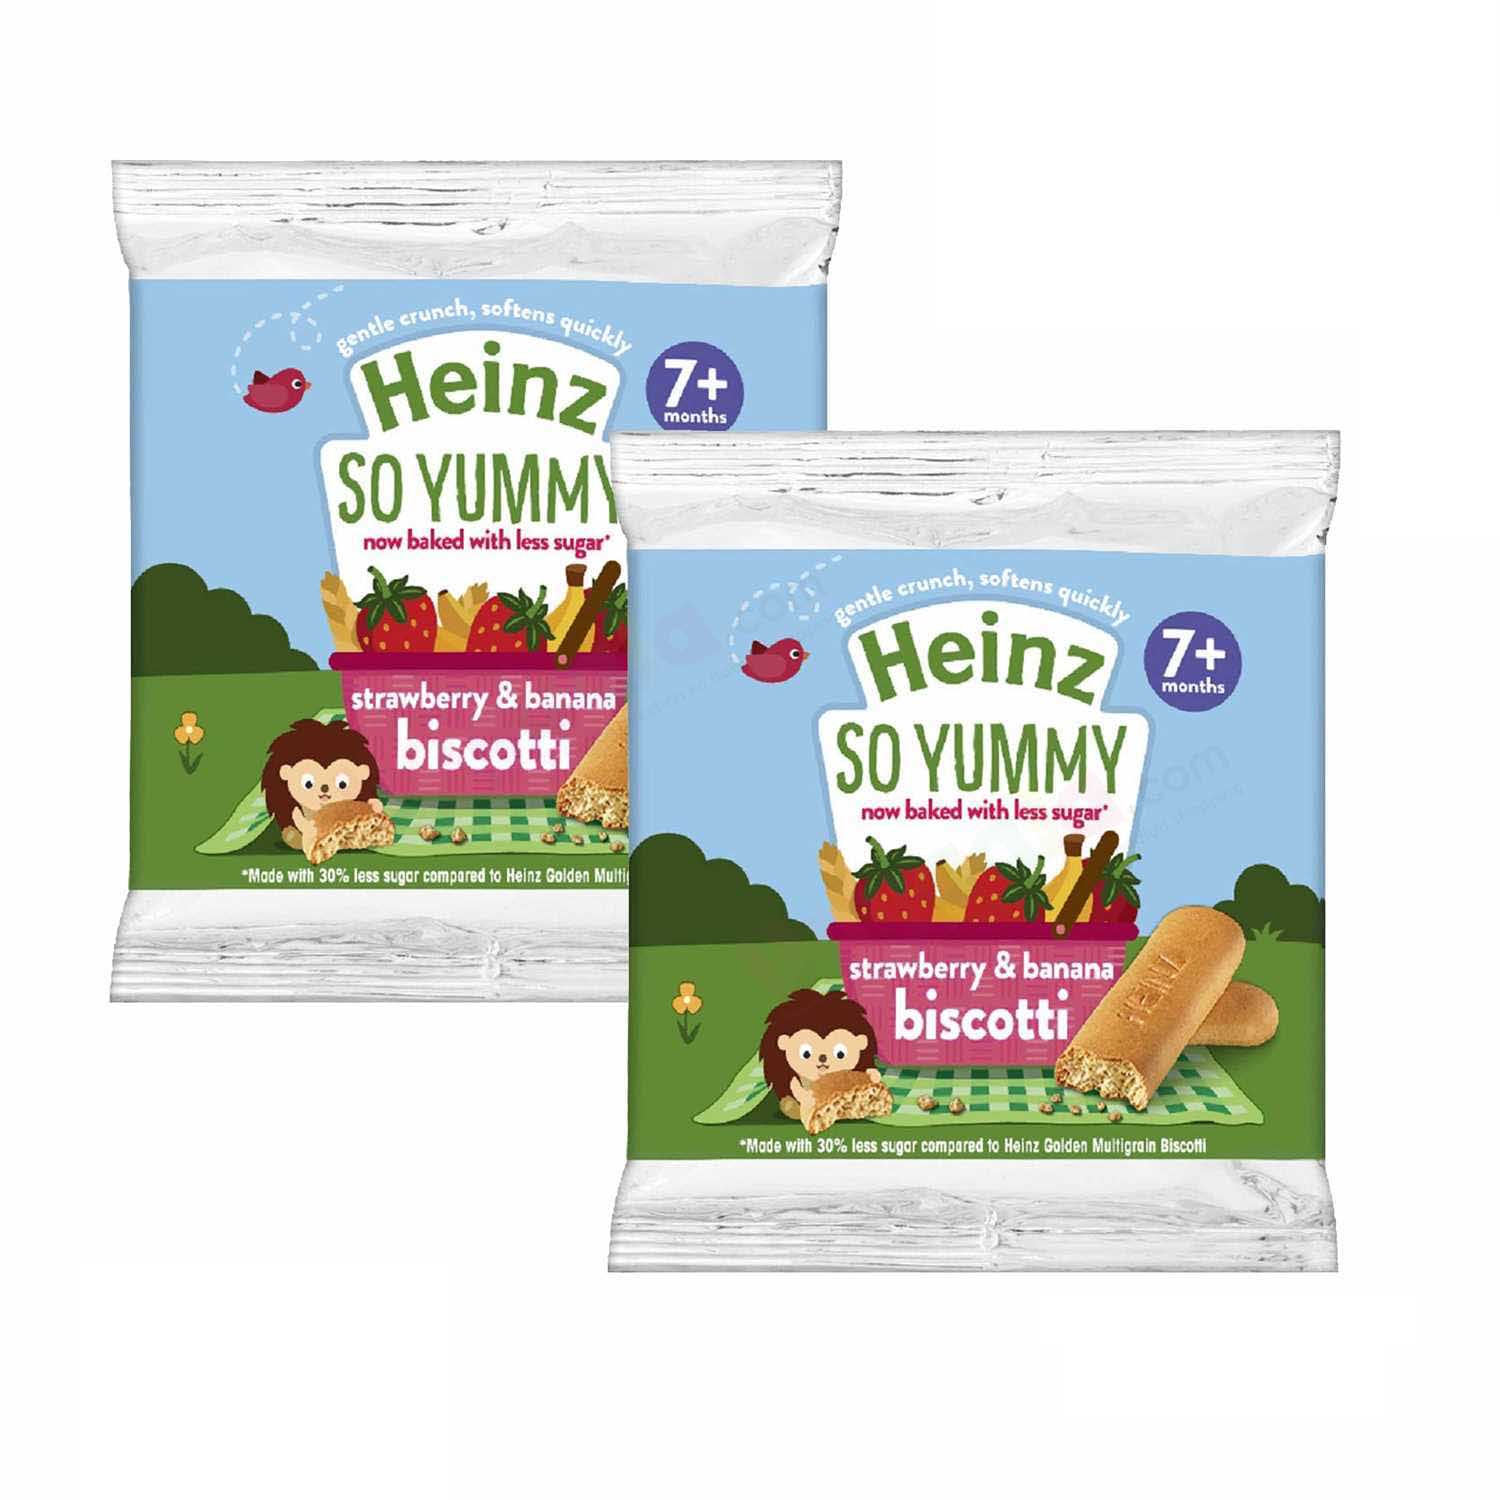 HEINZ SO YUMMY Strawberry and Banana biscotti for Kids snacks Pack of 2 - Strawberry + Banana Biscuits (60 g each)